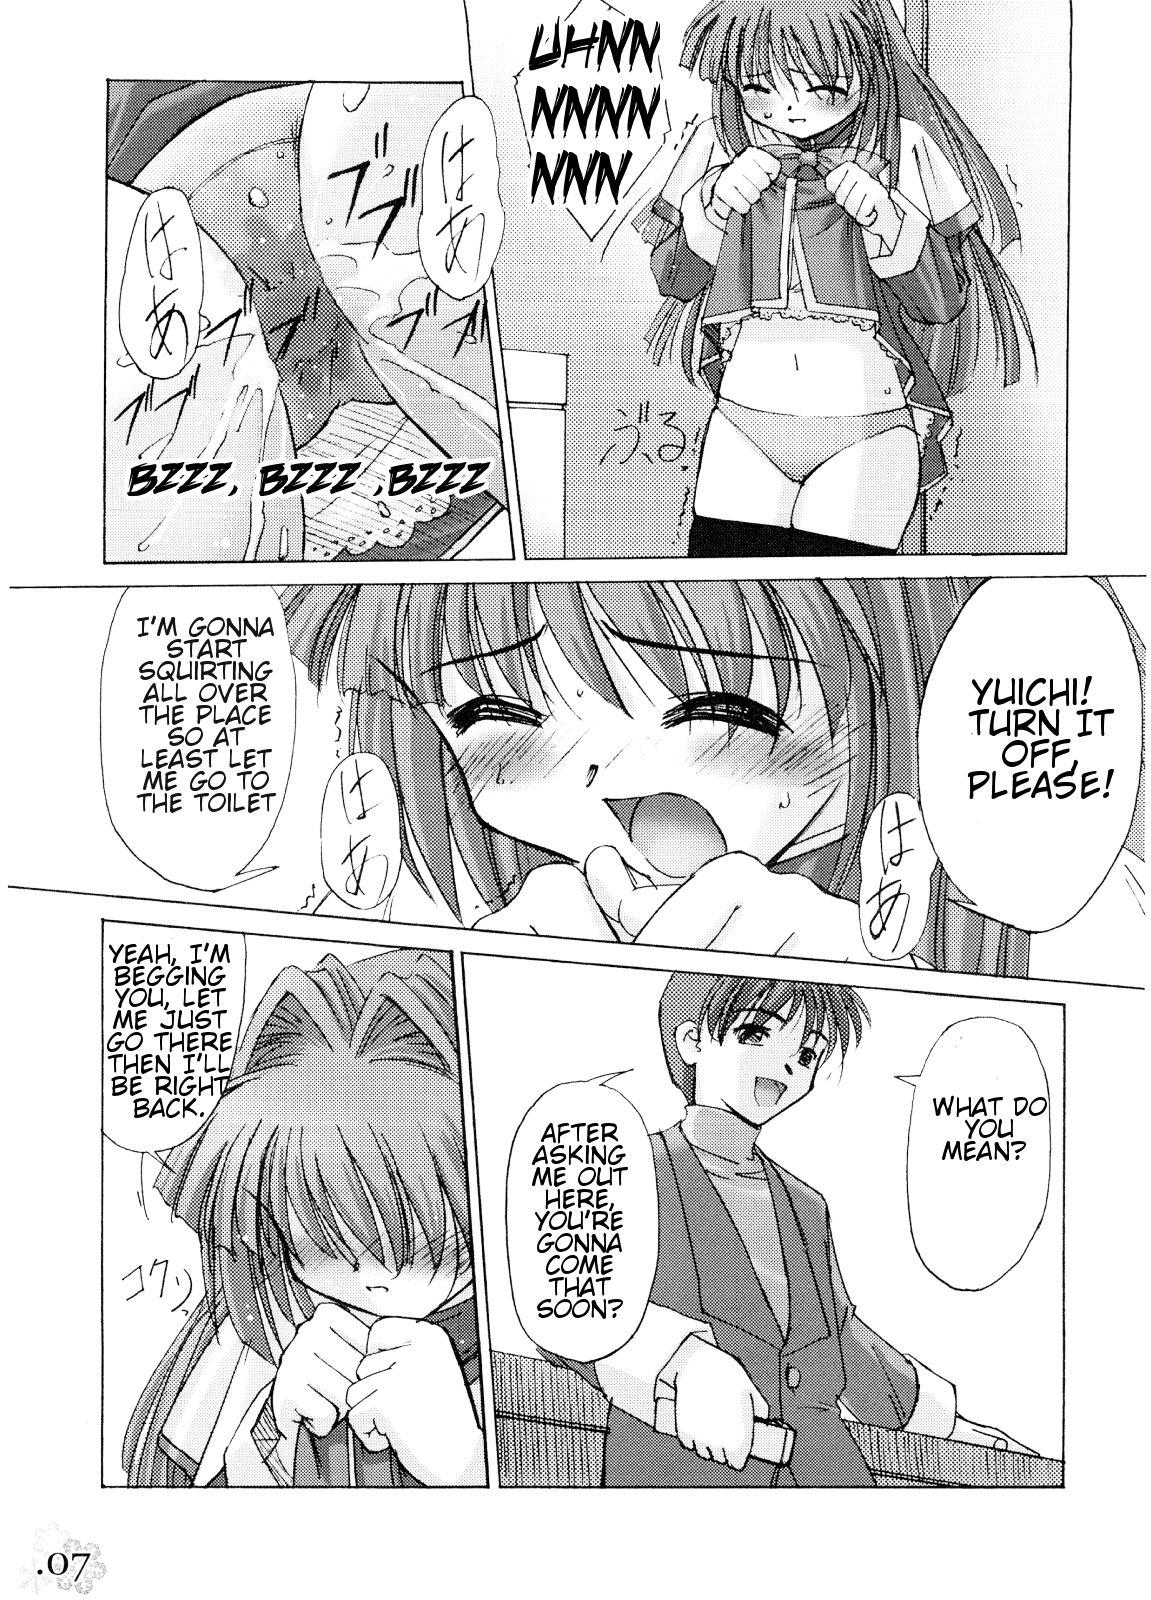 Teensnow You Are The Only Version: Kanon Part 2 - Kanon Women Sucking Dicks - Page 4